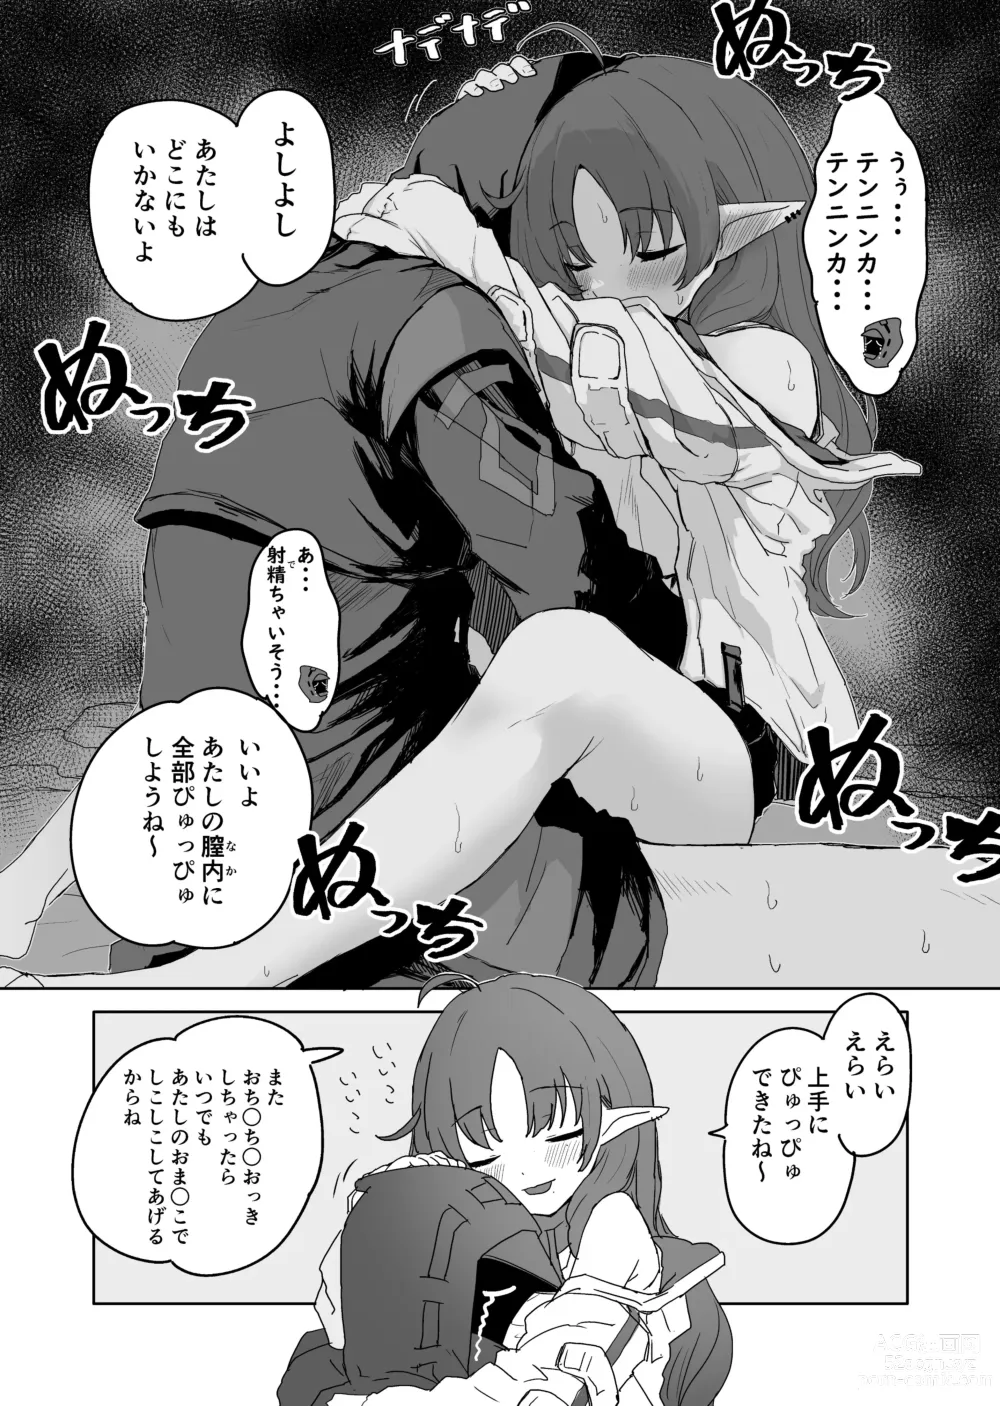 Page 40 of doujinshi Twitter collection